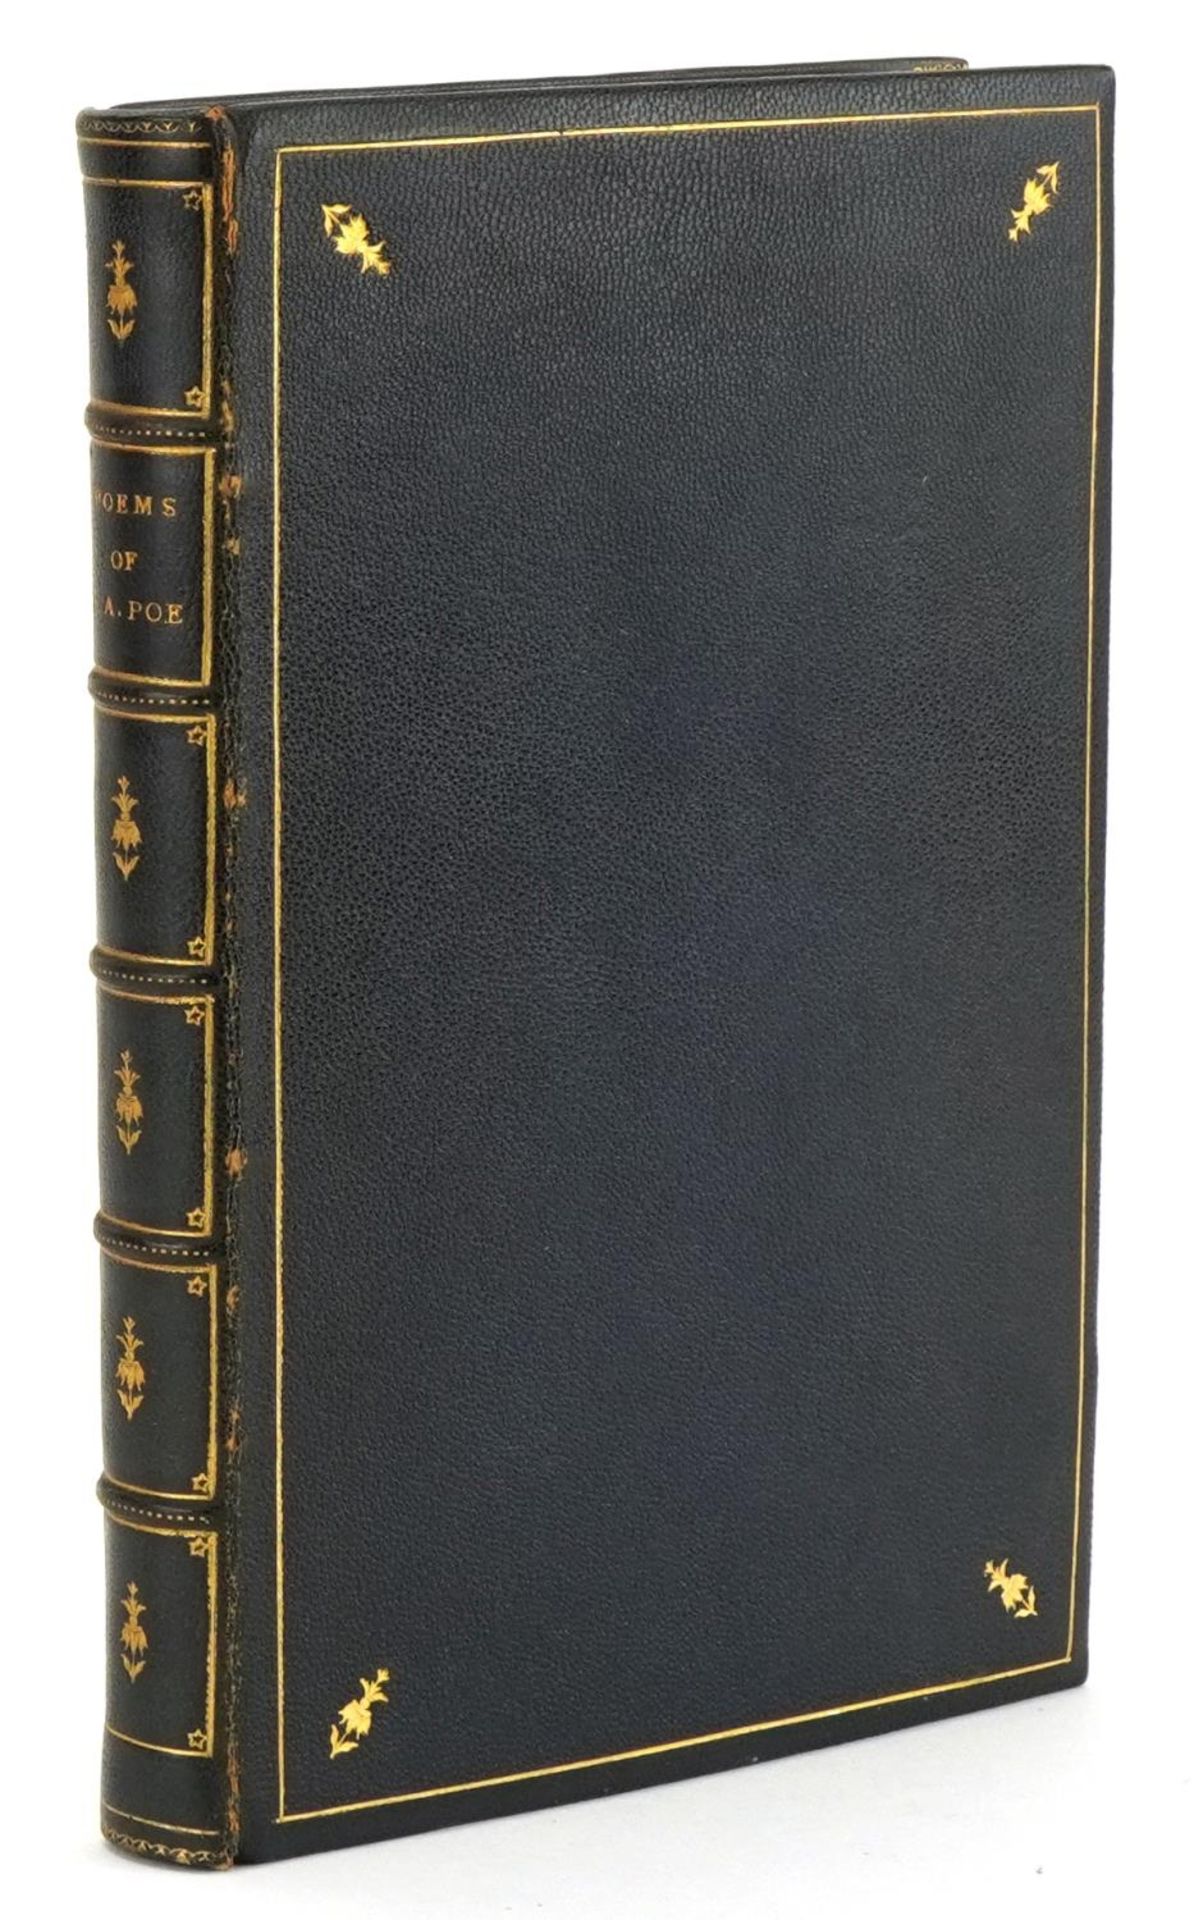 The Poems of Edgar Allan Poe by H Noel Williams, early 20th century hardback book published by